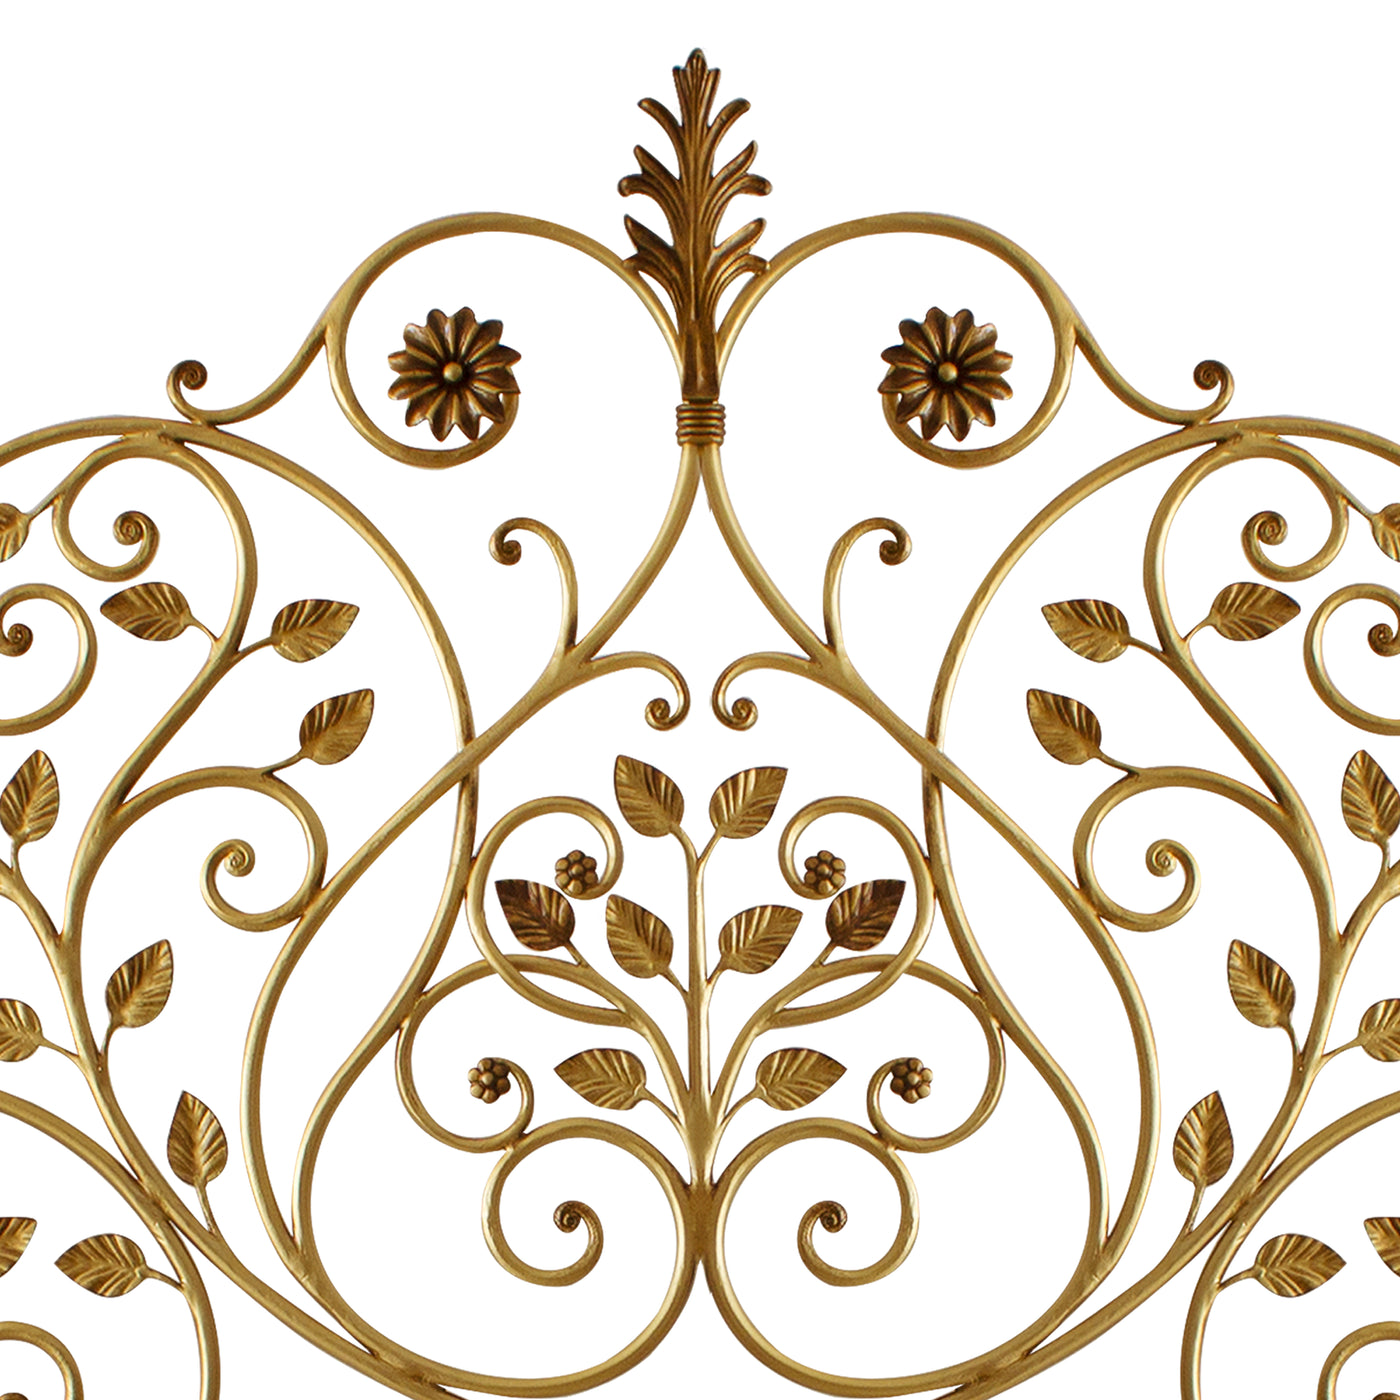 Close up of a wrought iron headboard made up of scrolls, leaves and flowers painted in an antique golden finish